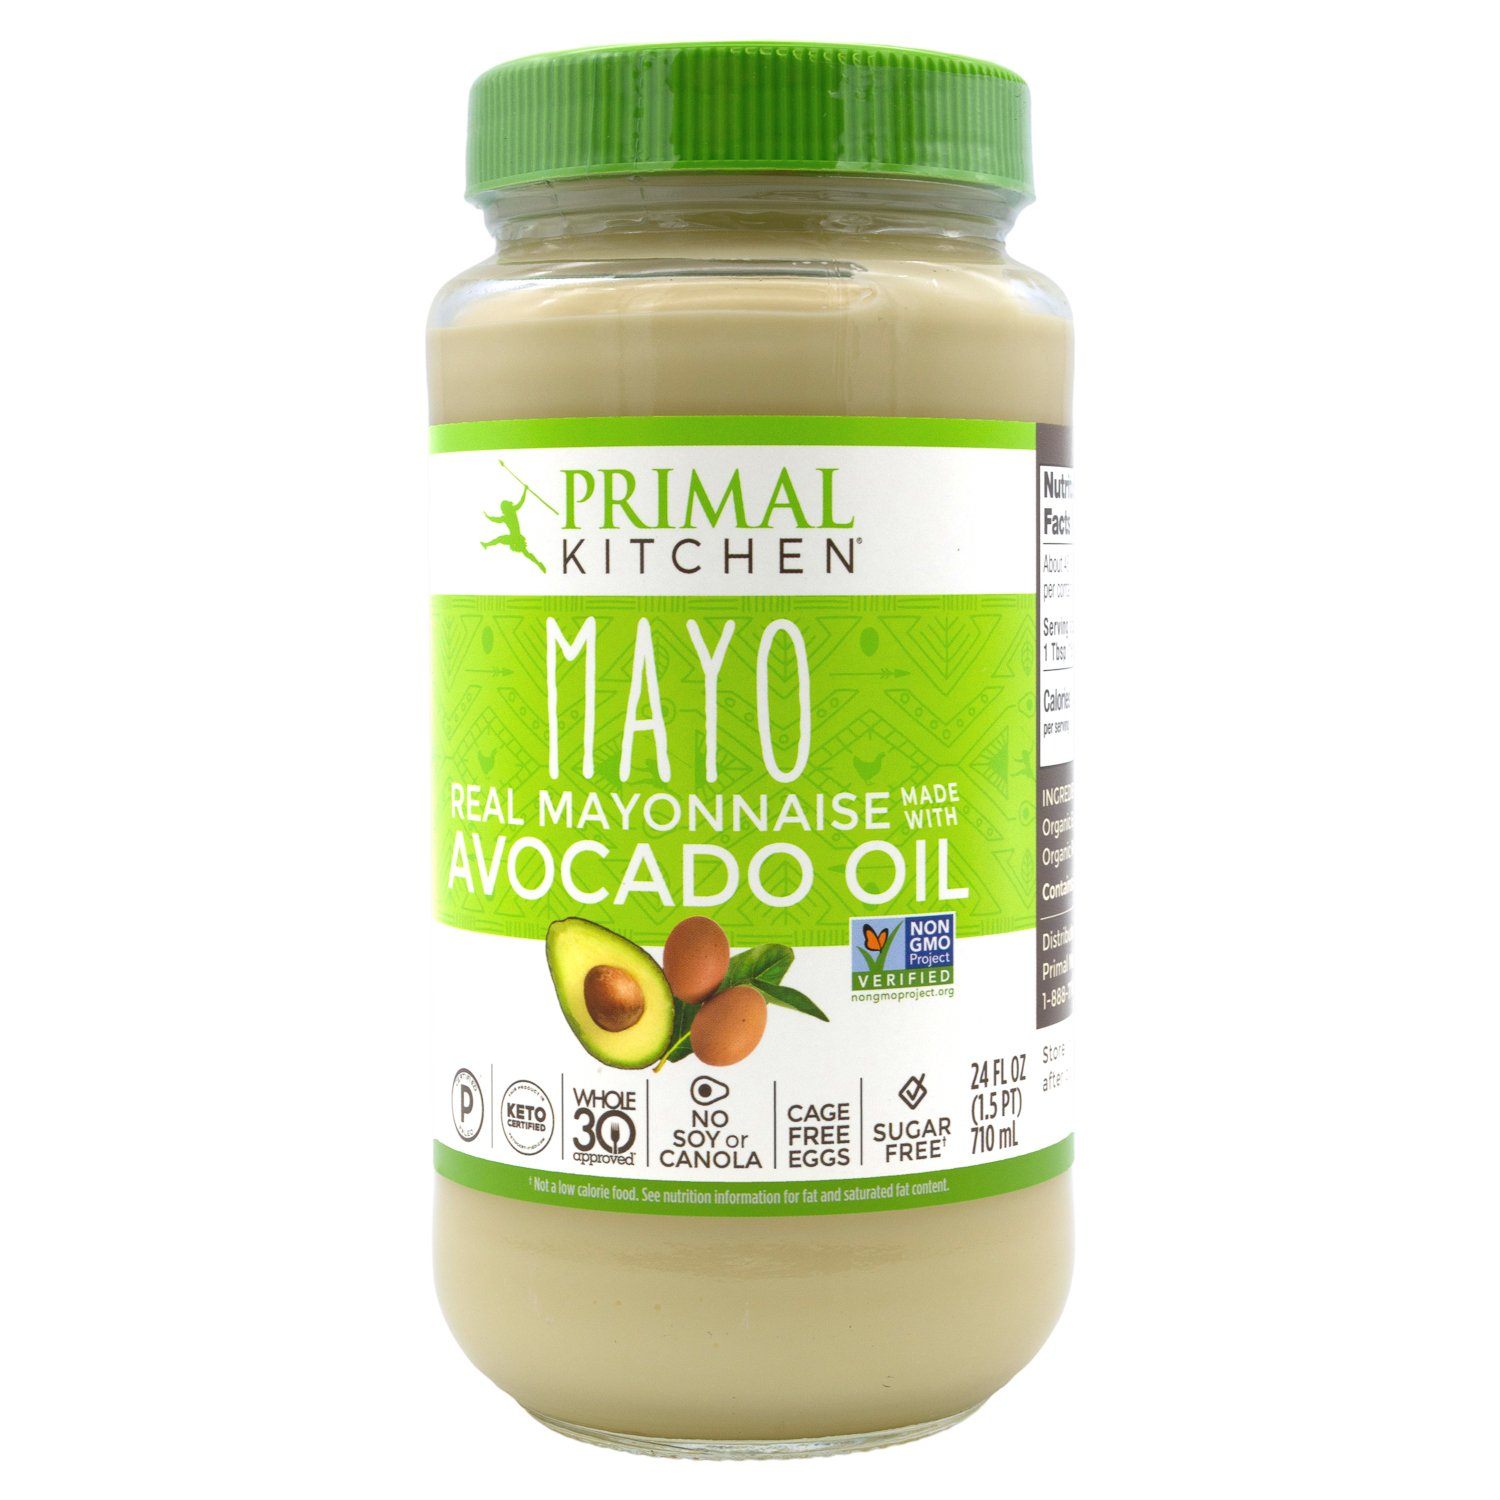 Primal Kitchen Mayo with Avocado Oil Primal Kitchen 24 Fluid Ounce 